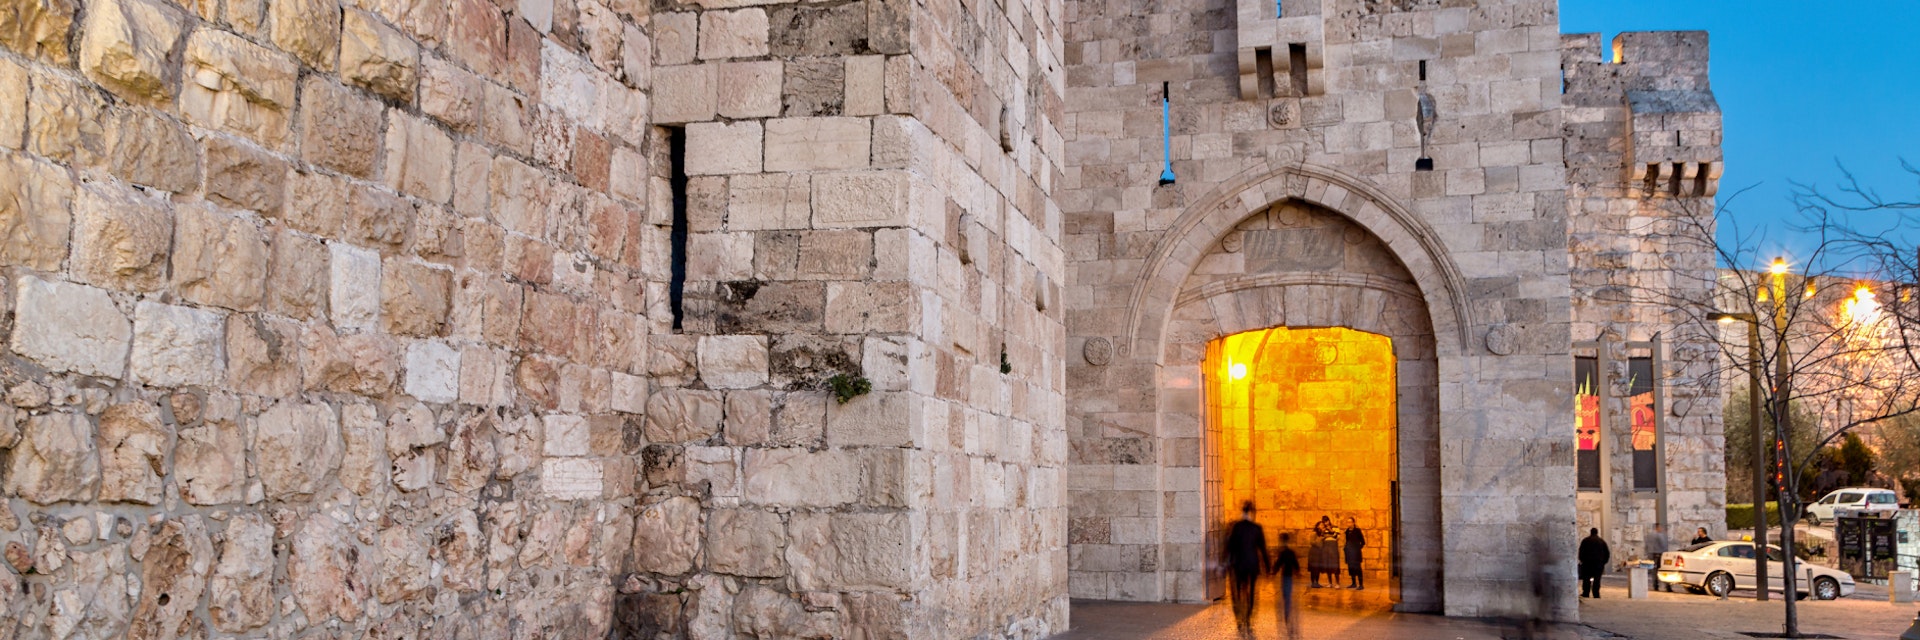 Jaffa Gate at Night - Jerusalem Old City; Shutterstock ID 594552767; Your name (First / Last): Lauren Keith; GL account no.: 65050; Netsuite department name: Online Editorial; Full Product or Project name including edition: Israel Update 2017